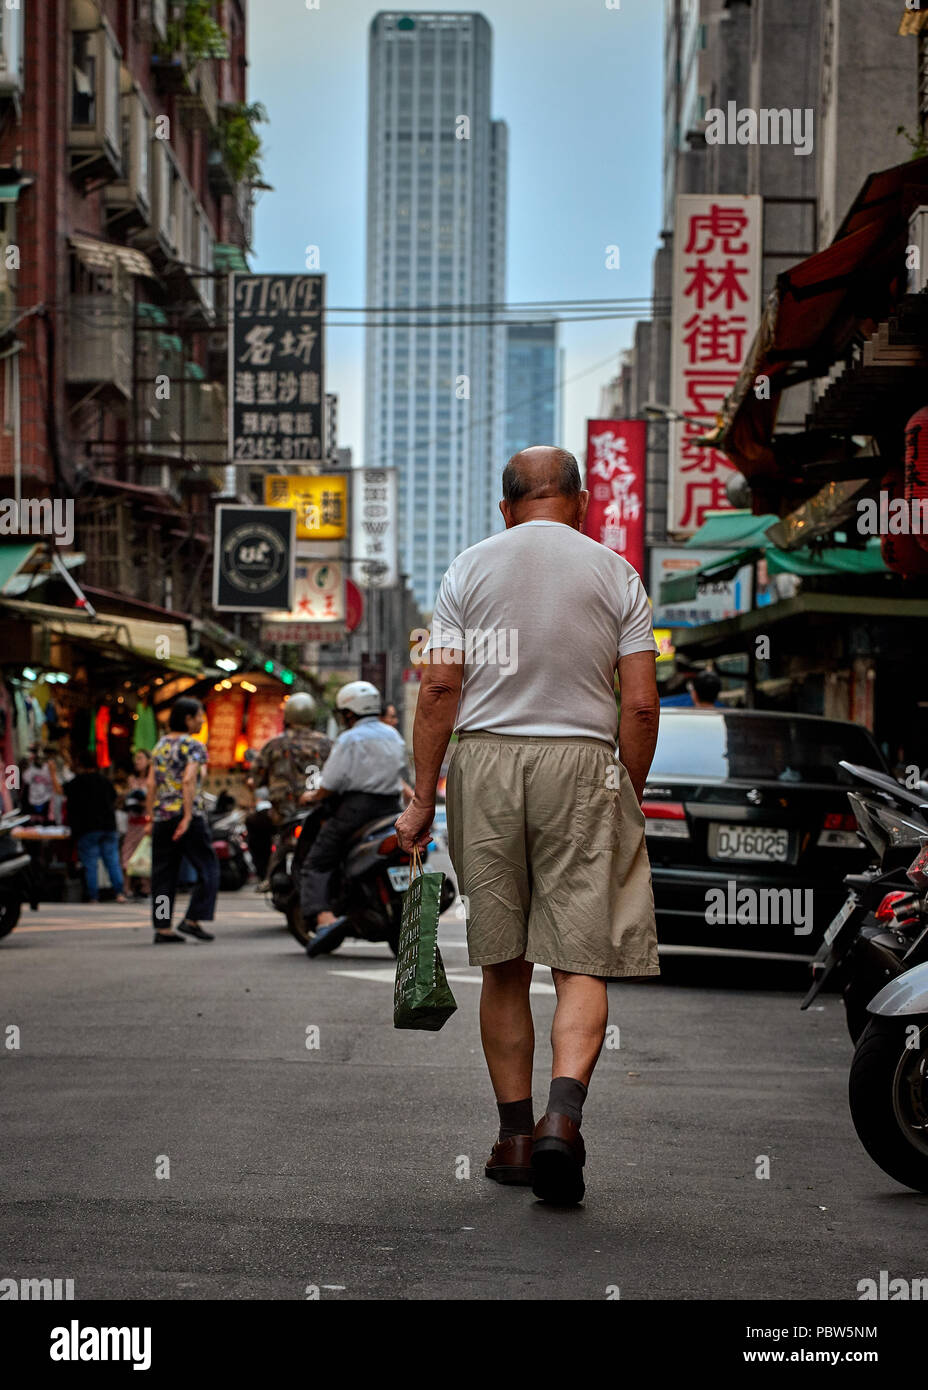 An old poor man walking on the asian street market with skyscrapers on the background Stock Photo